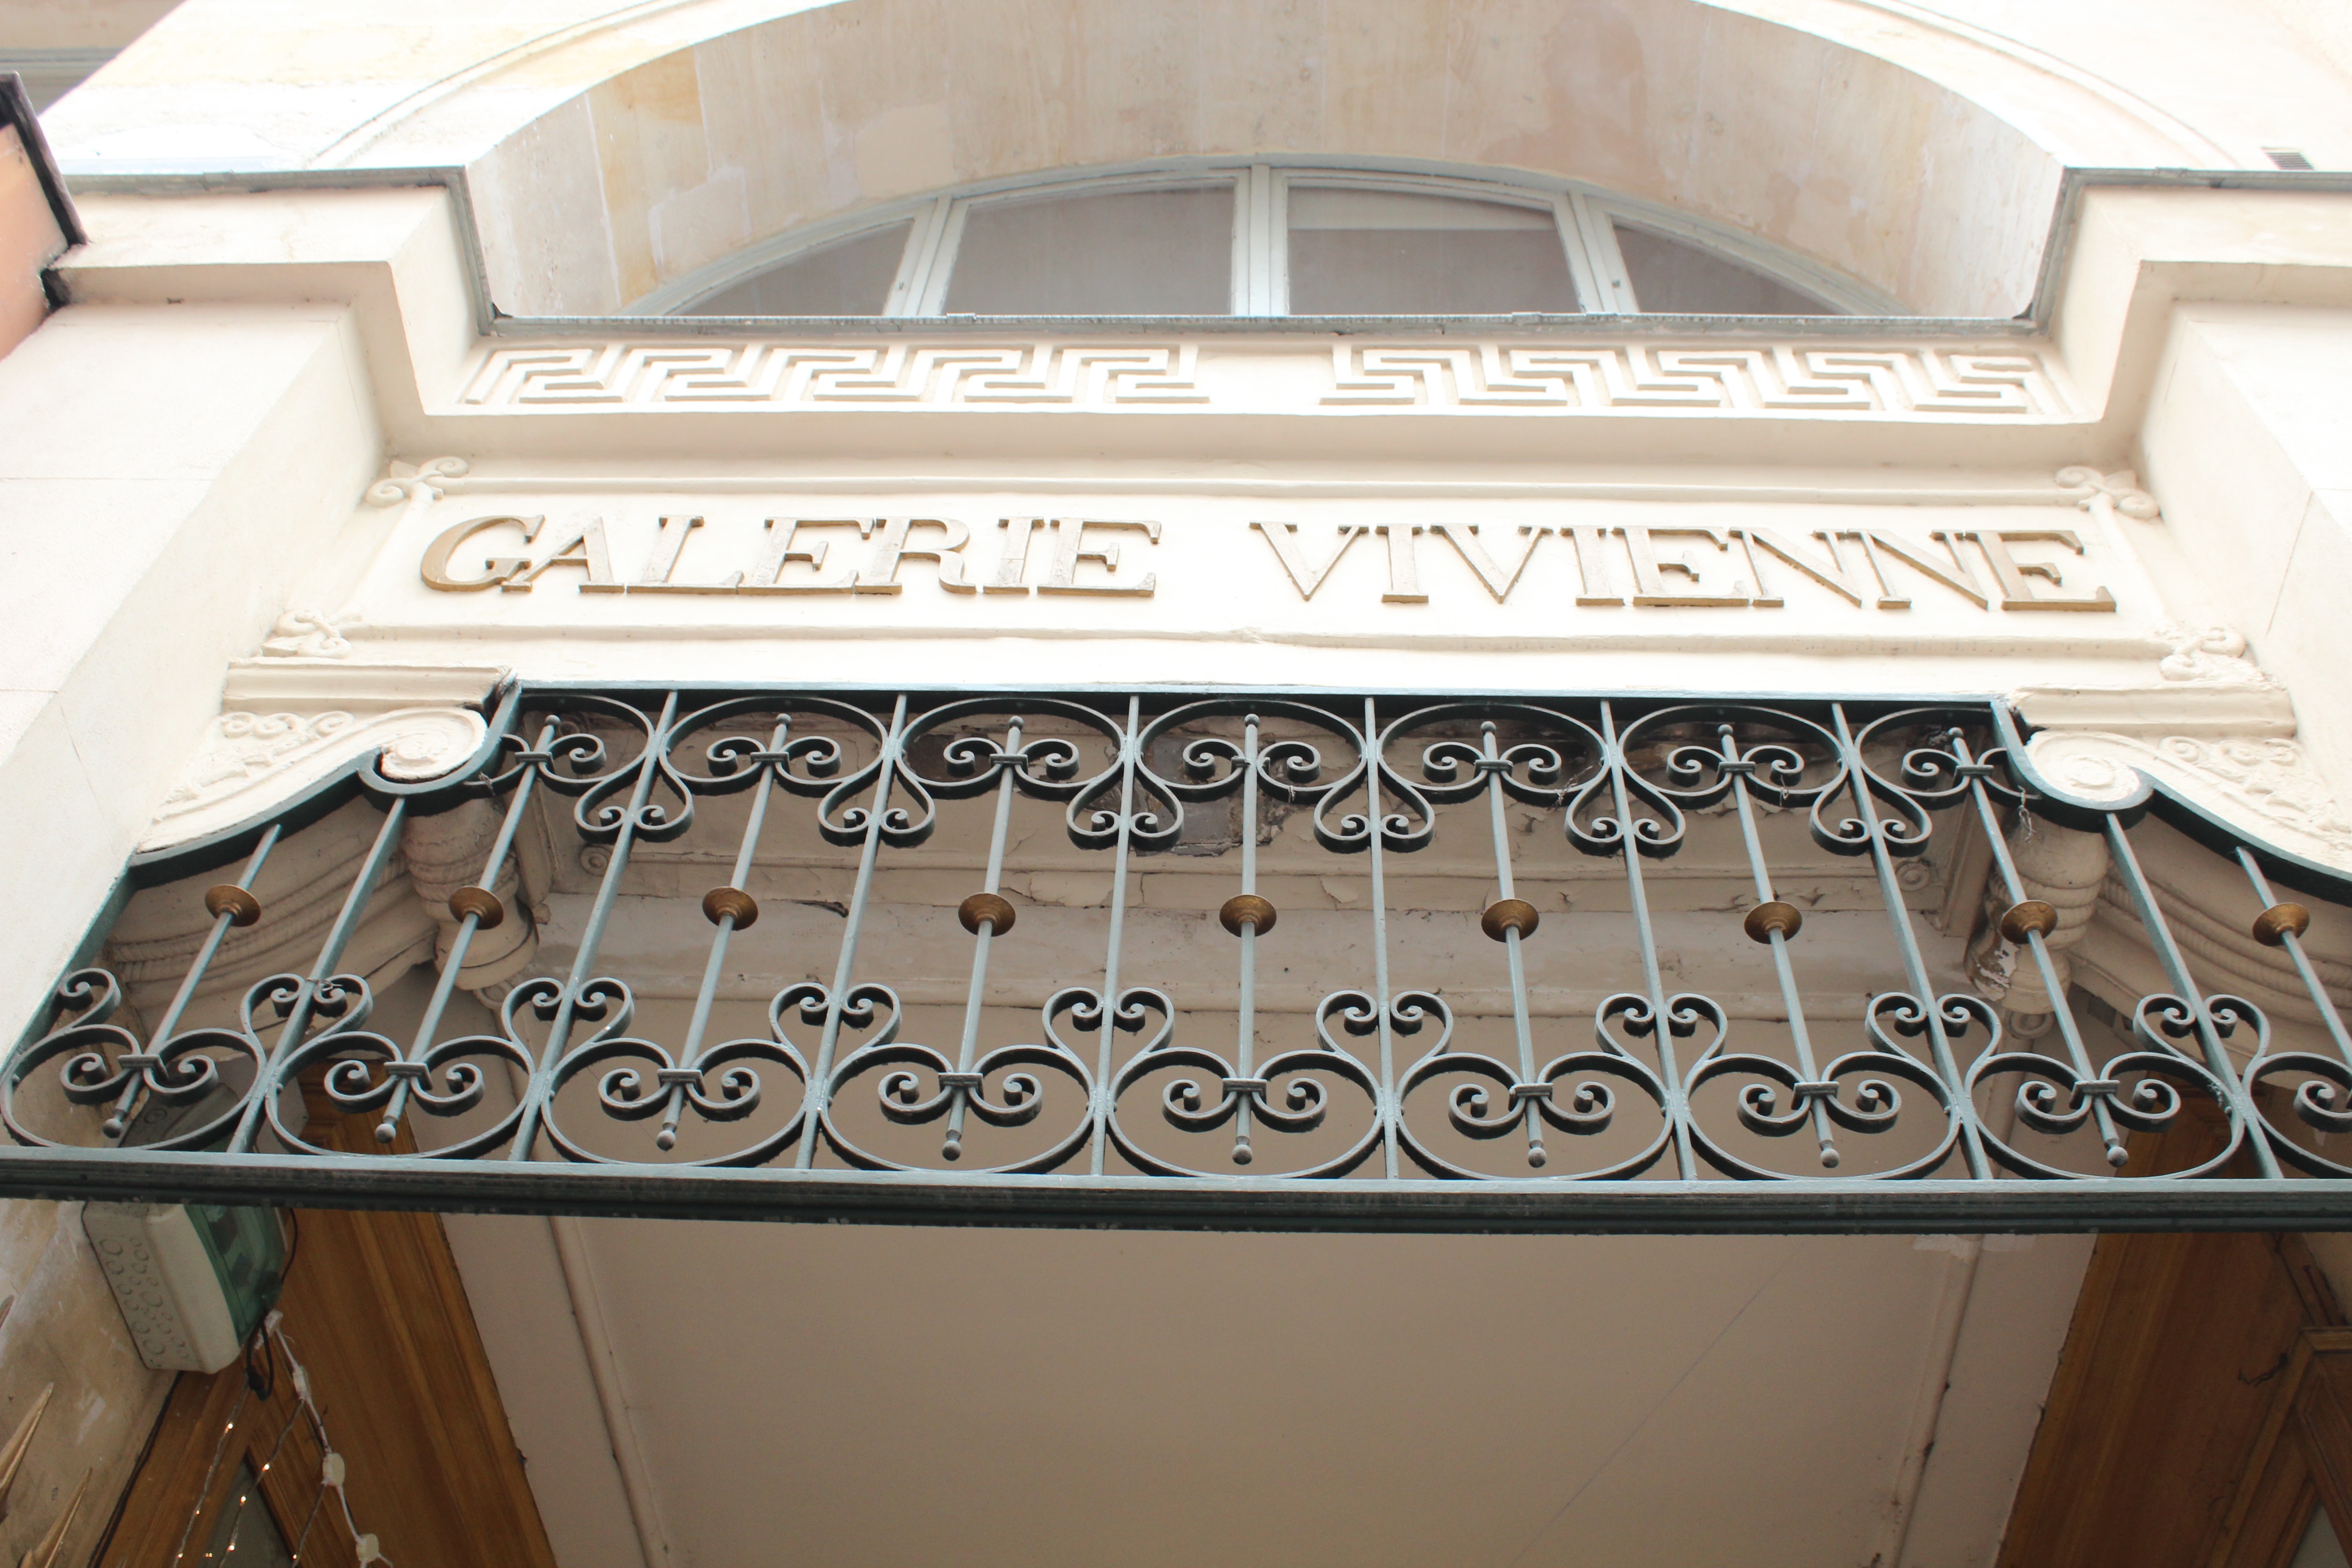 My Paris Trip, "'S Marvelous." Galerie Vivienne is one of the Covered Passages of Paris.